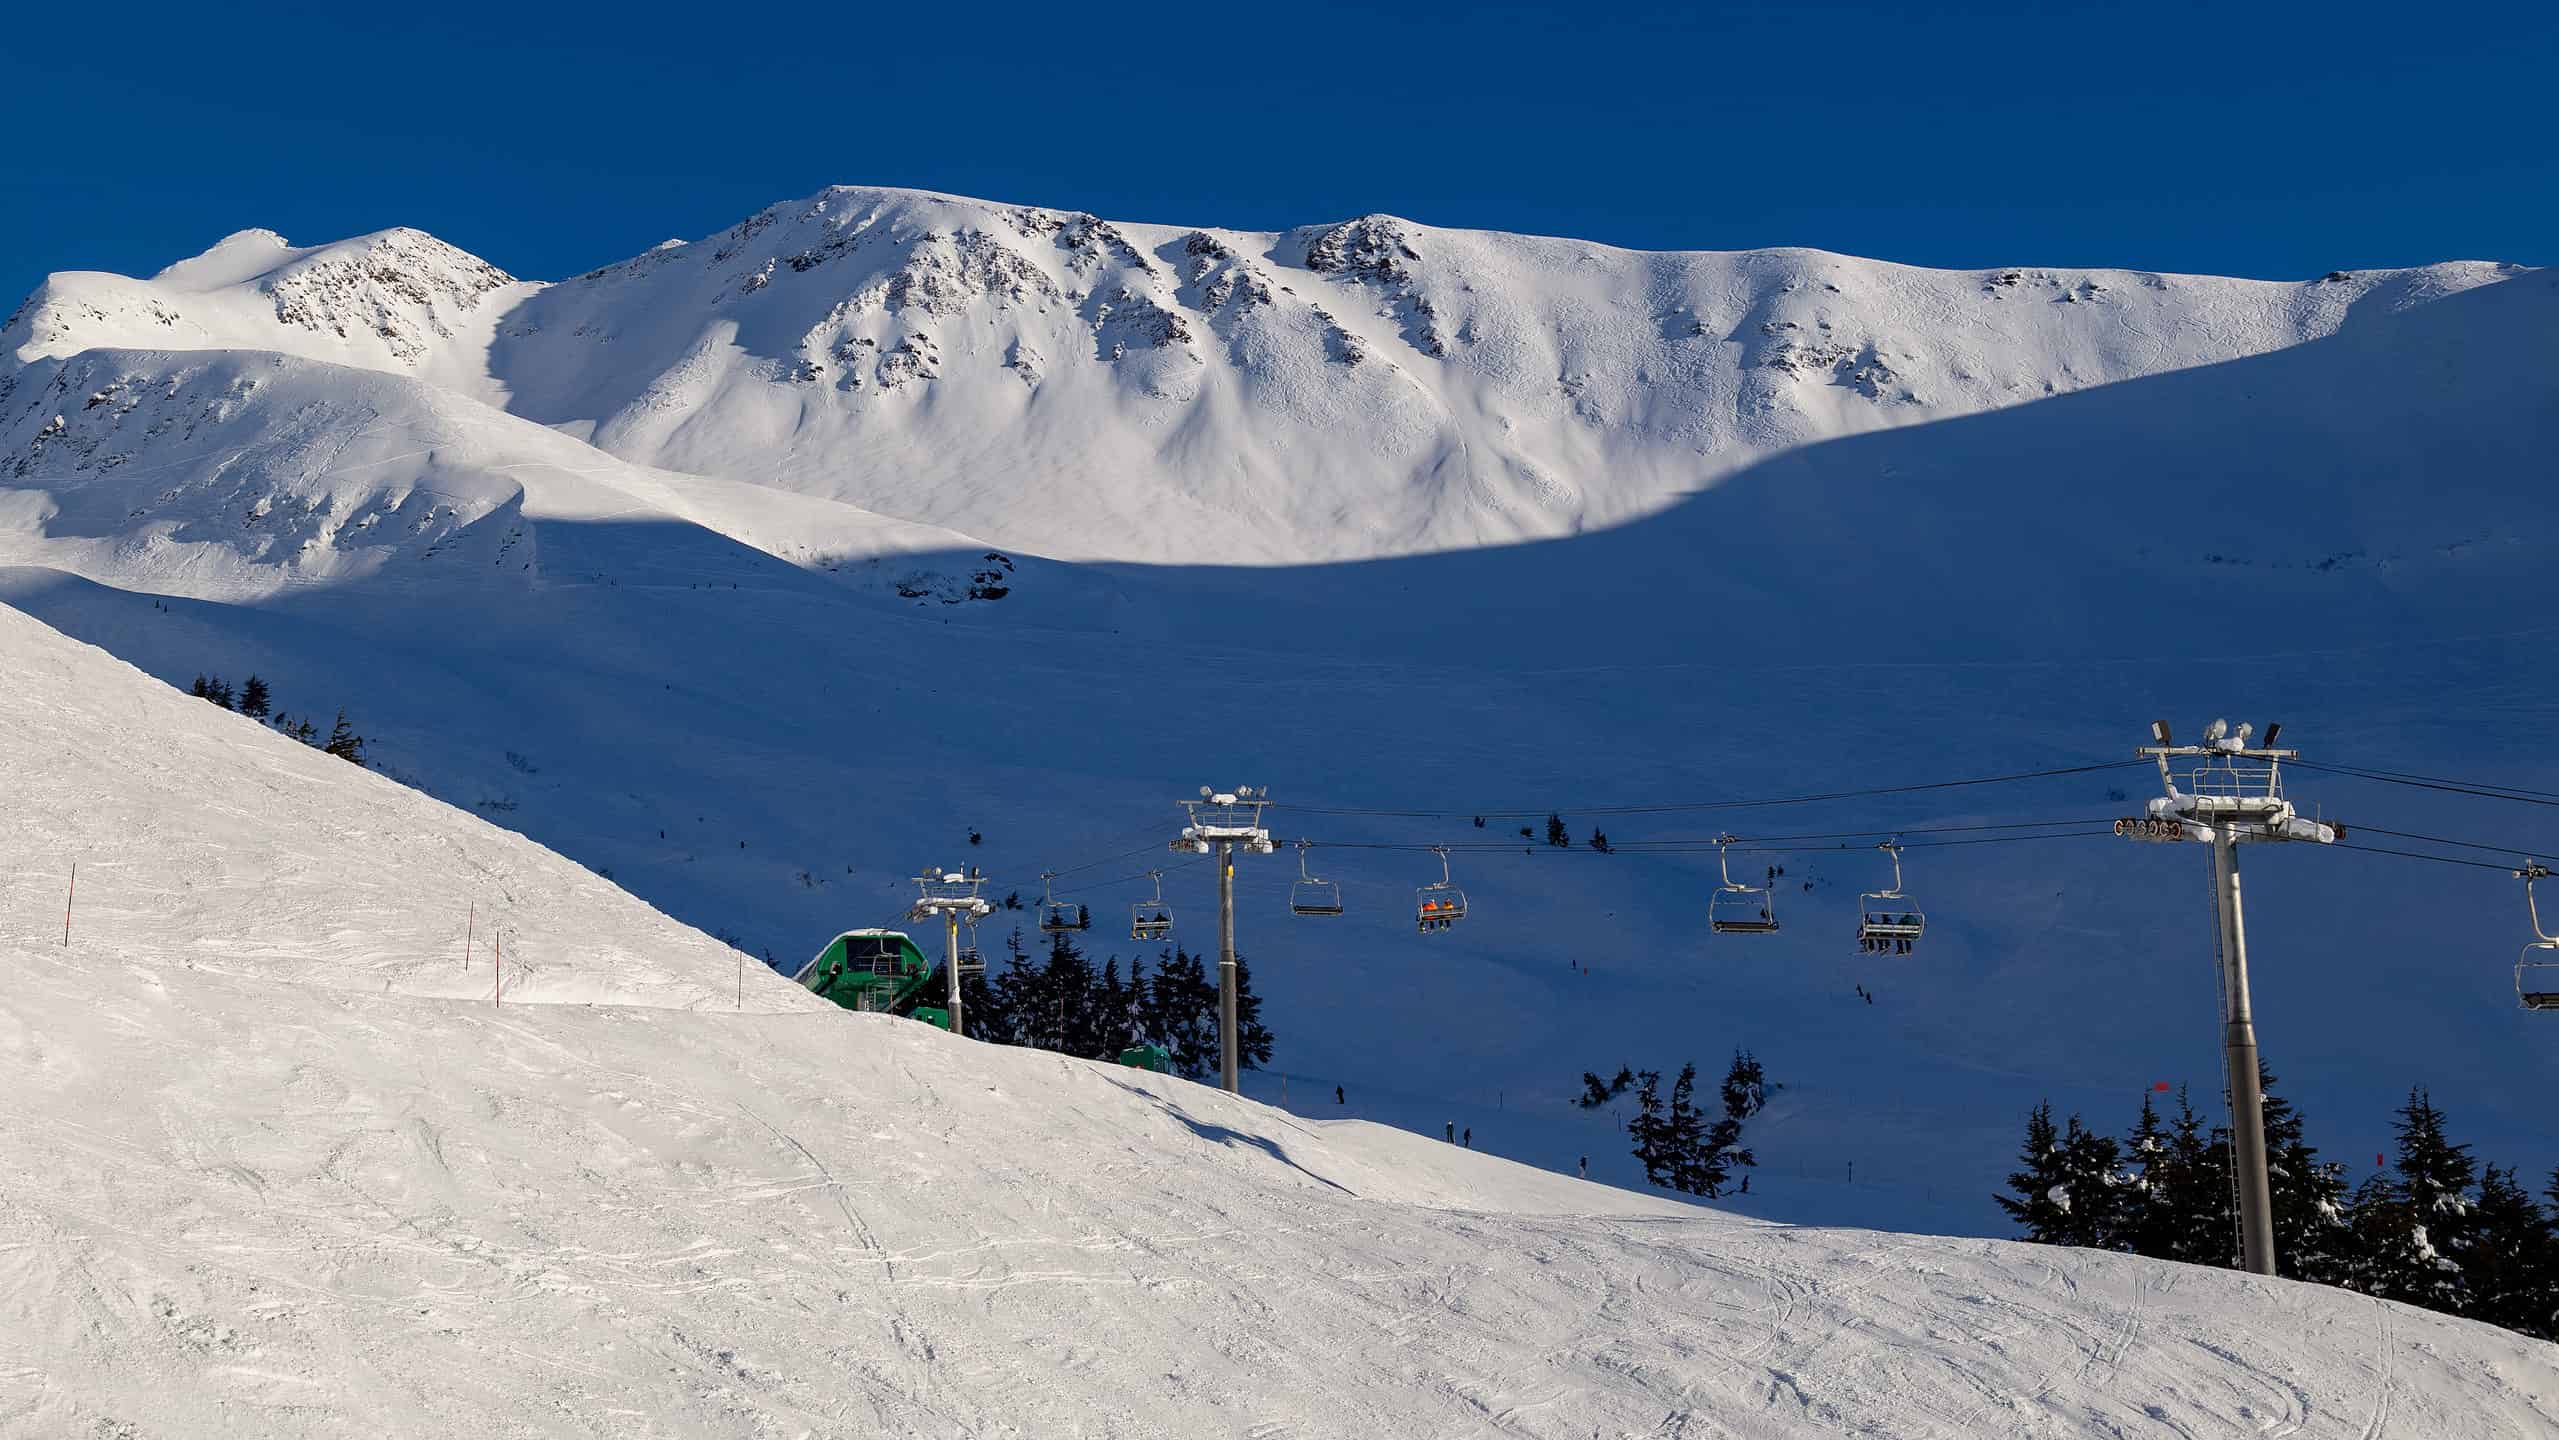 Best Skiing In Alaska: Guide For Best Mountains and Dates for Prime Snow Conditions